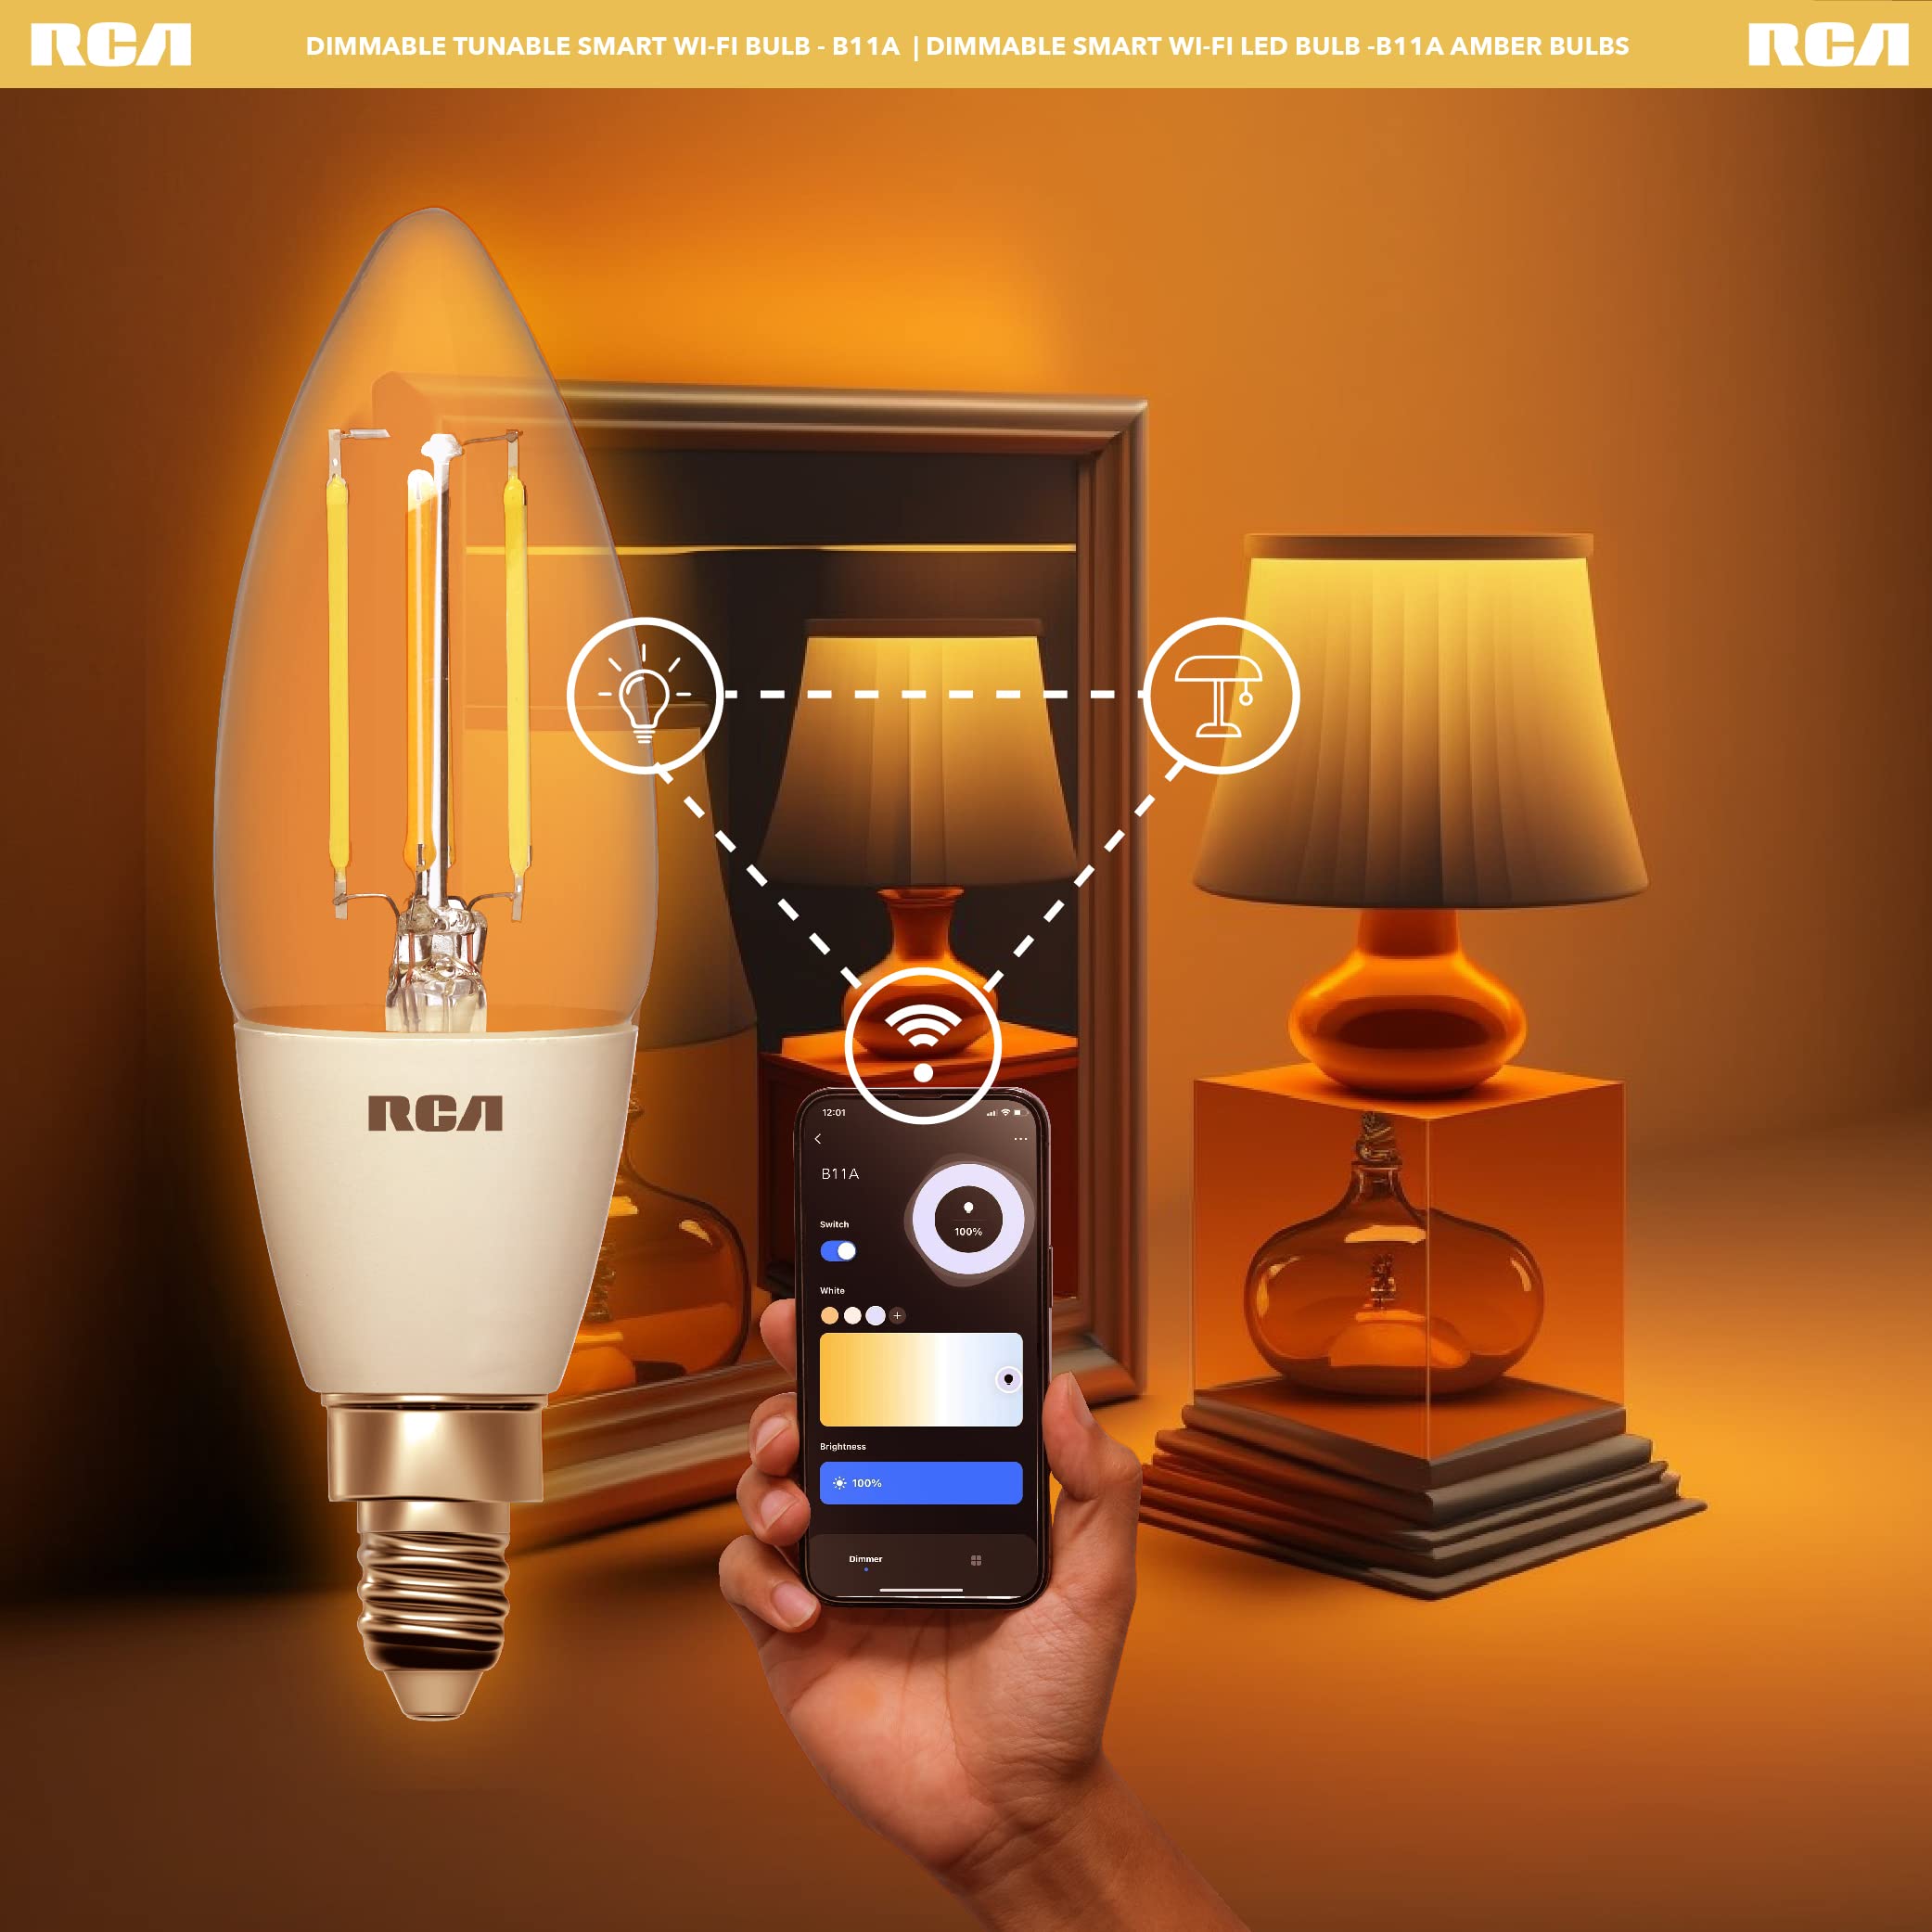 RCA WiFi Smart Light Bulbs | Amber B11 Vintage LED Light Bulb Compatible with Google and Alexa Devices for Home | 4W (40W Eq), 320 LM | Control from Anywhere w/Smartphone | Dimmable & Tunable